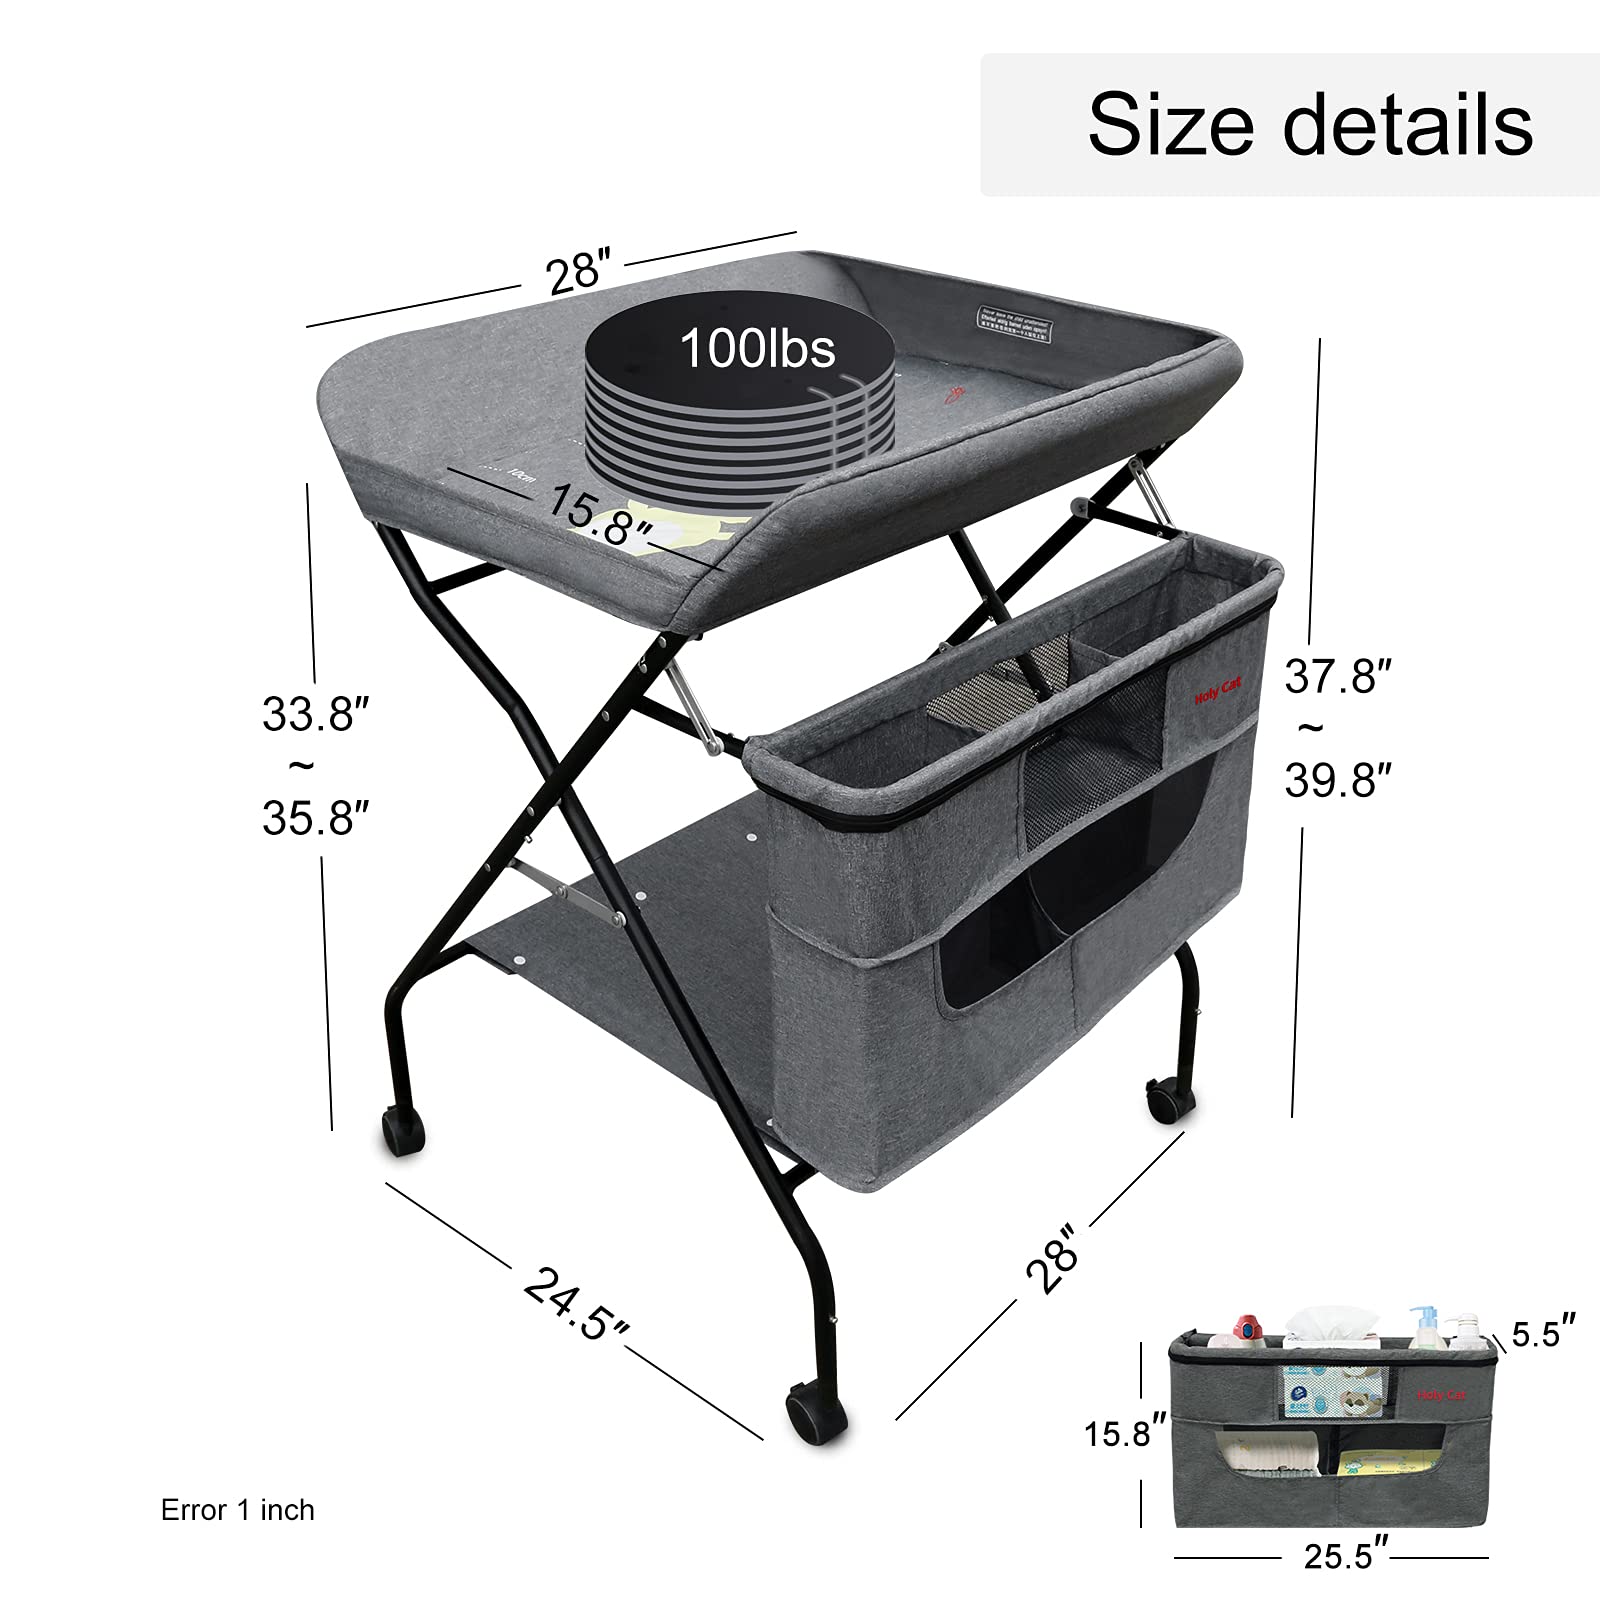 Holy Cat Baby Portable Changing Table with Wheels Adjustable Height Folding Infant Diaper Station Mobile Nursery Stand with Newborn Lightweight Large Storage Rack - Grey